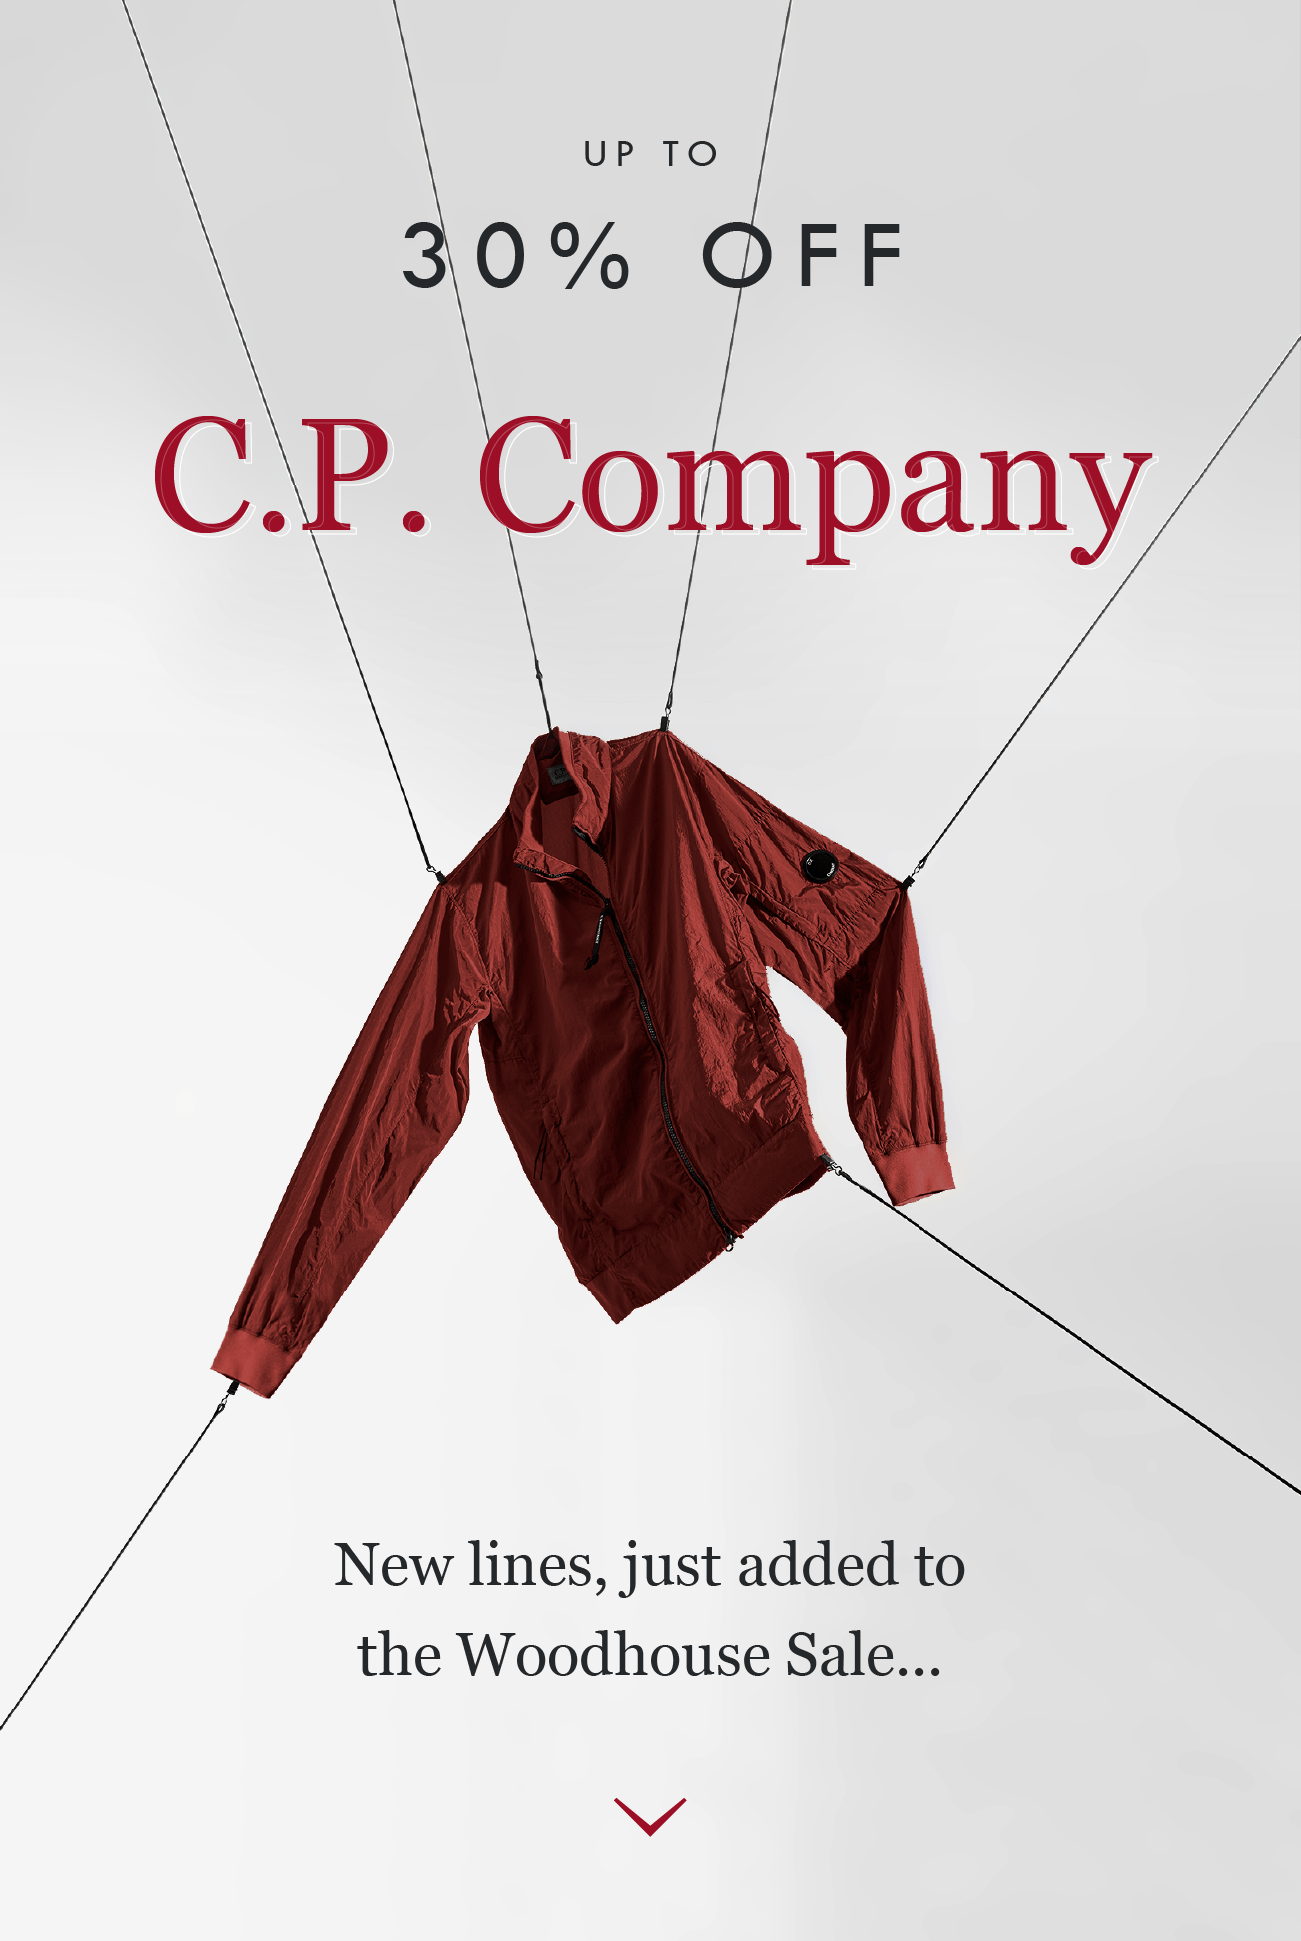 UP T O
30% OFF
C.P. Company
New lines, just added to
the Woodhouse Sale...